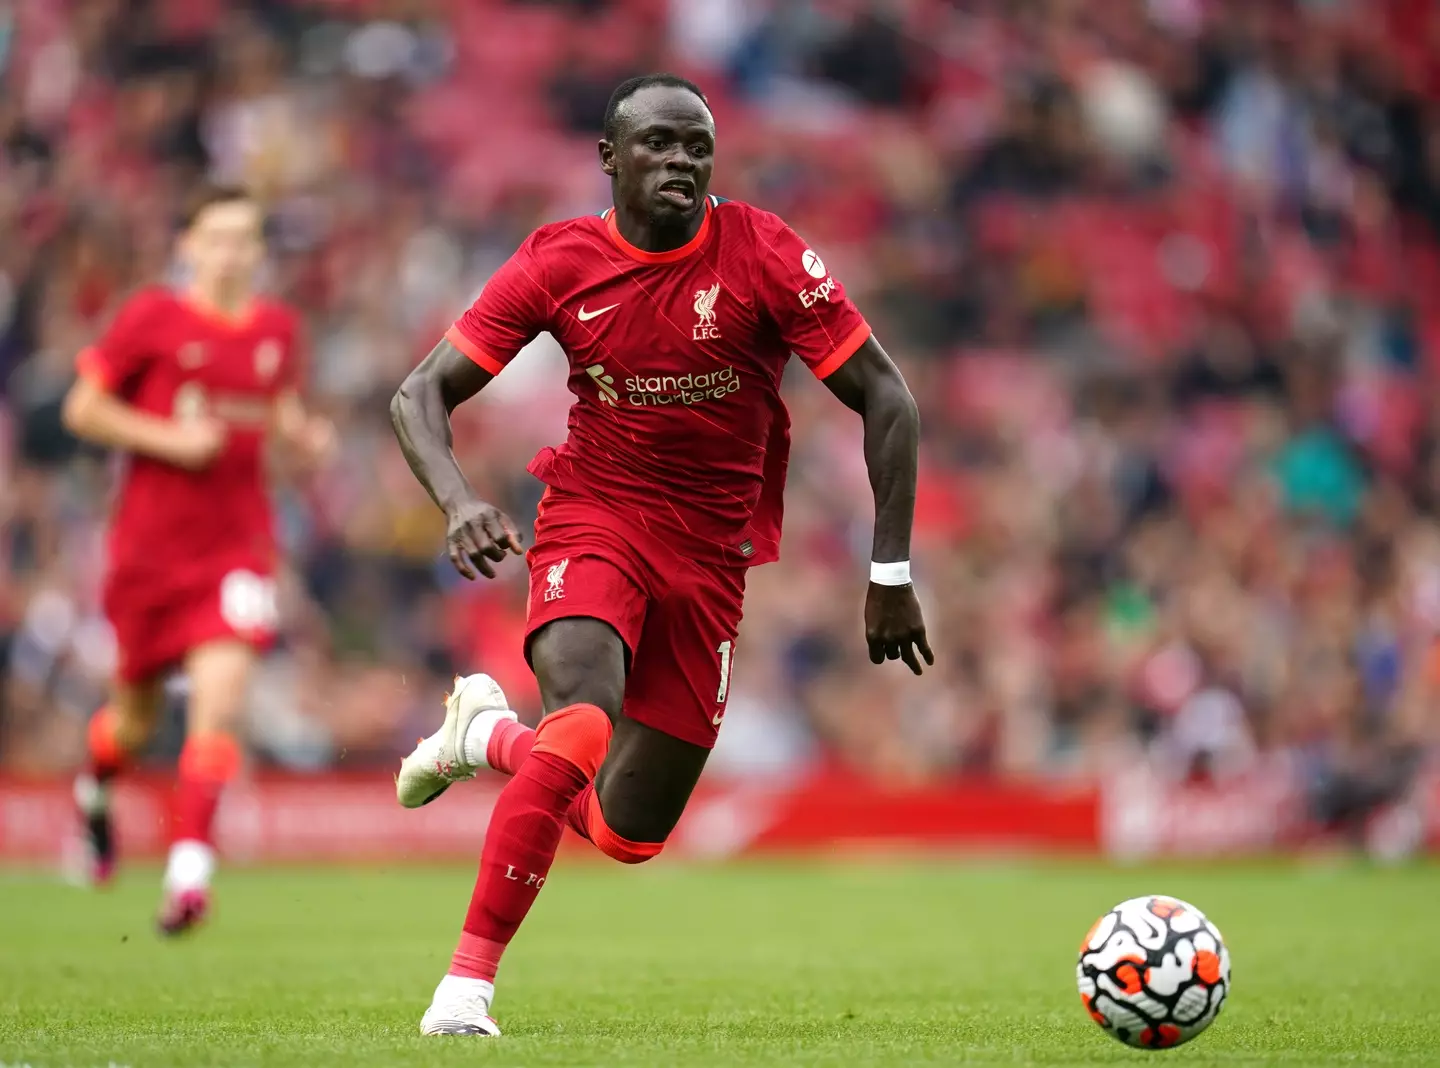 Sadio Mane has netted in two of his three most recent Premier League appearances 